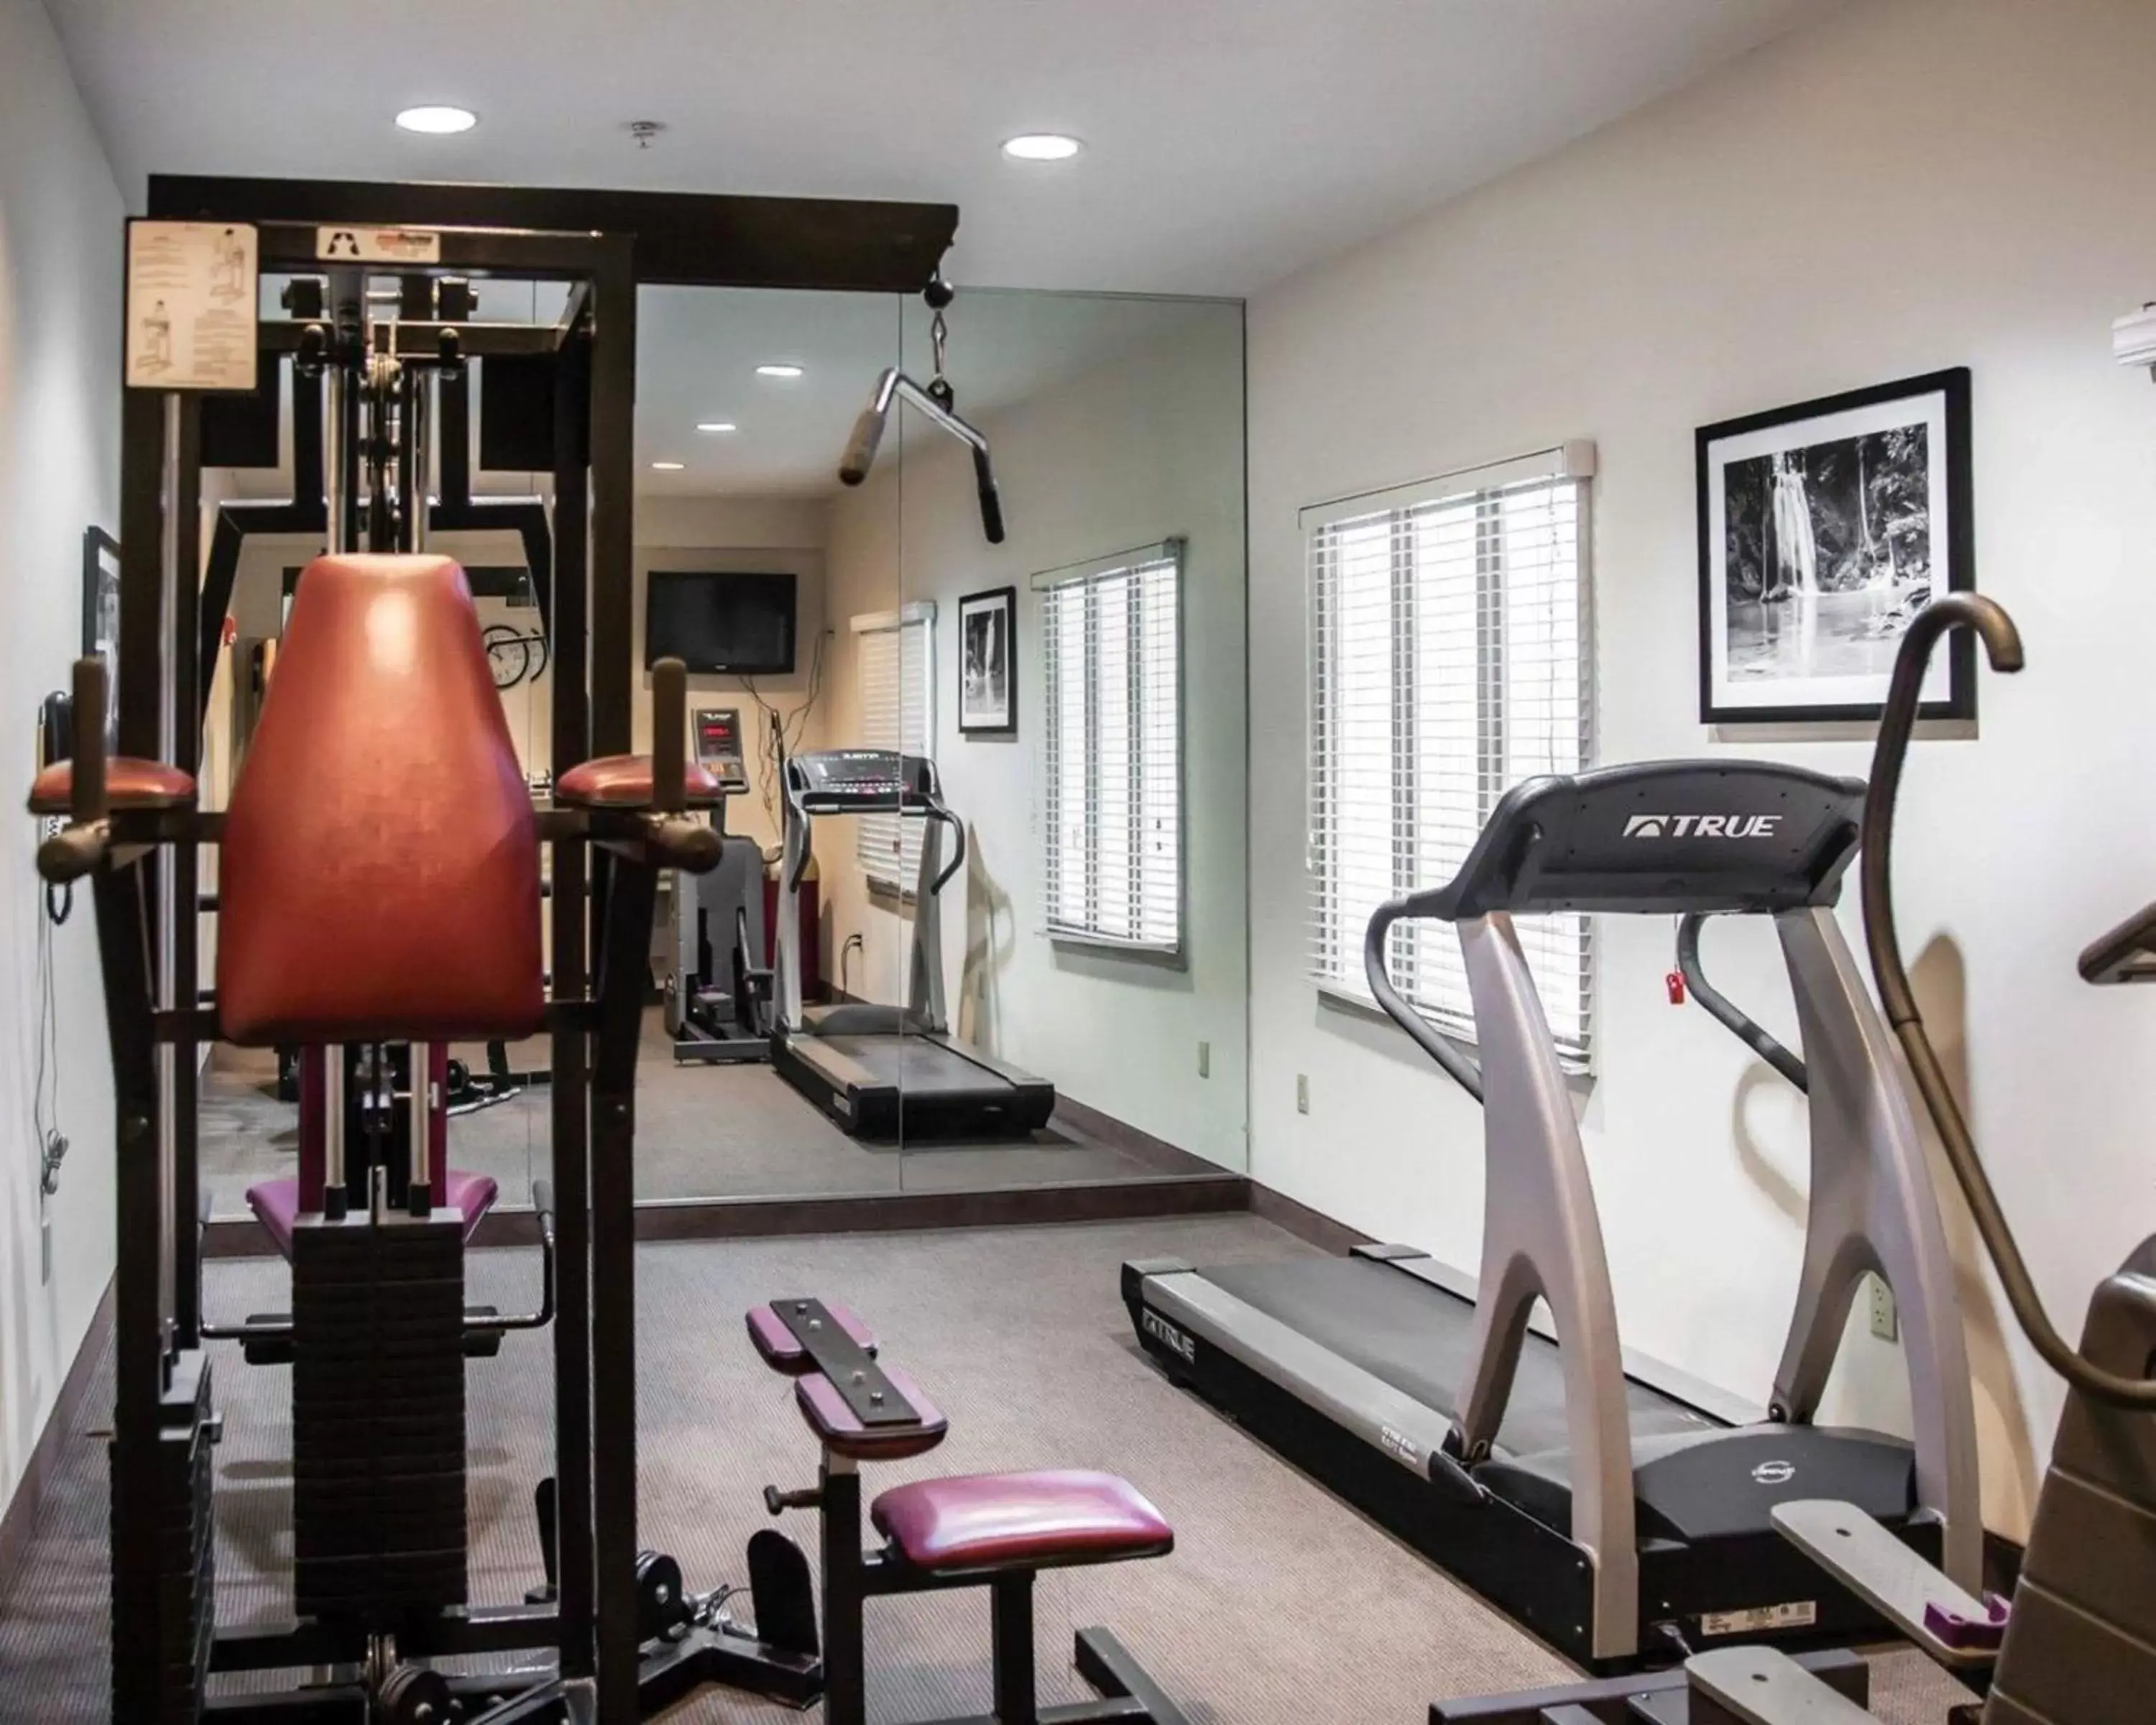 Fitness centre/facilities, Fitness Center/Facilities in Wingate by Wyndham Bel Air I-95 Exit 77A - APG Area